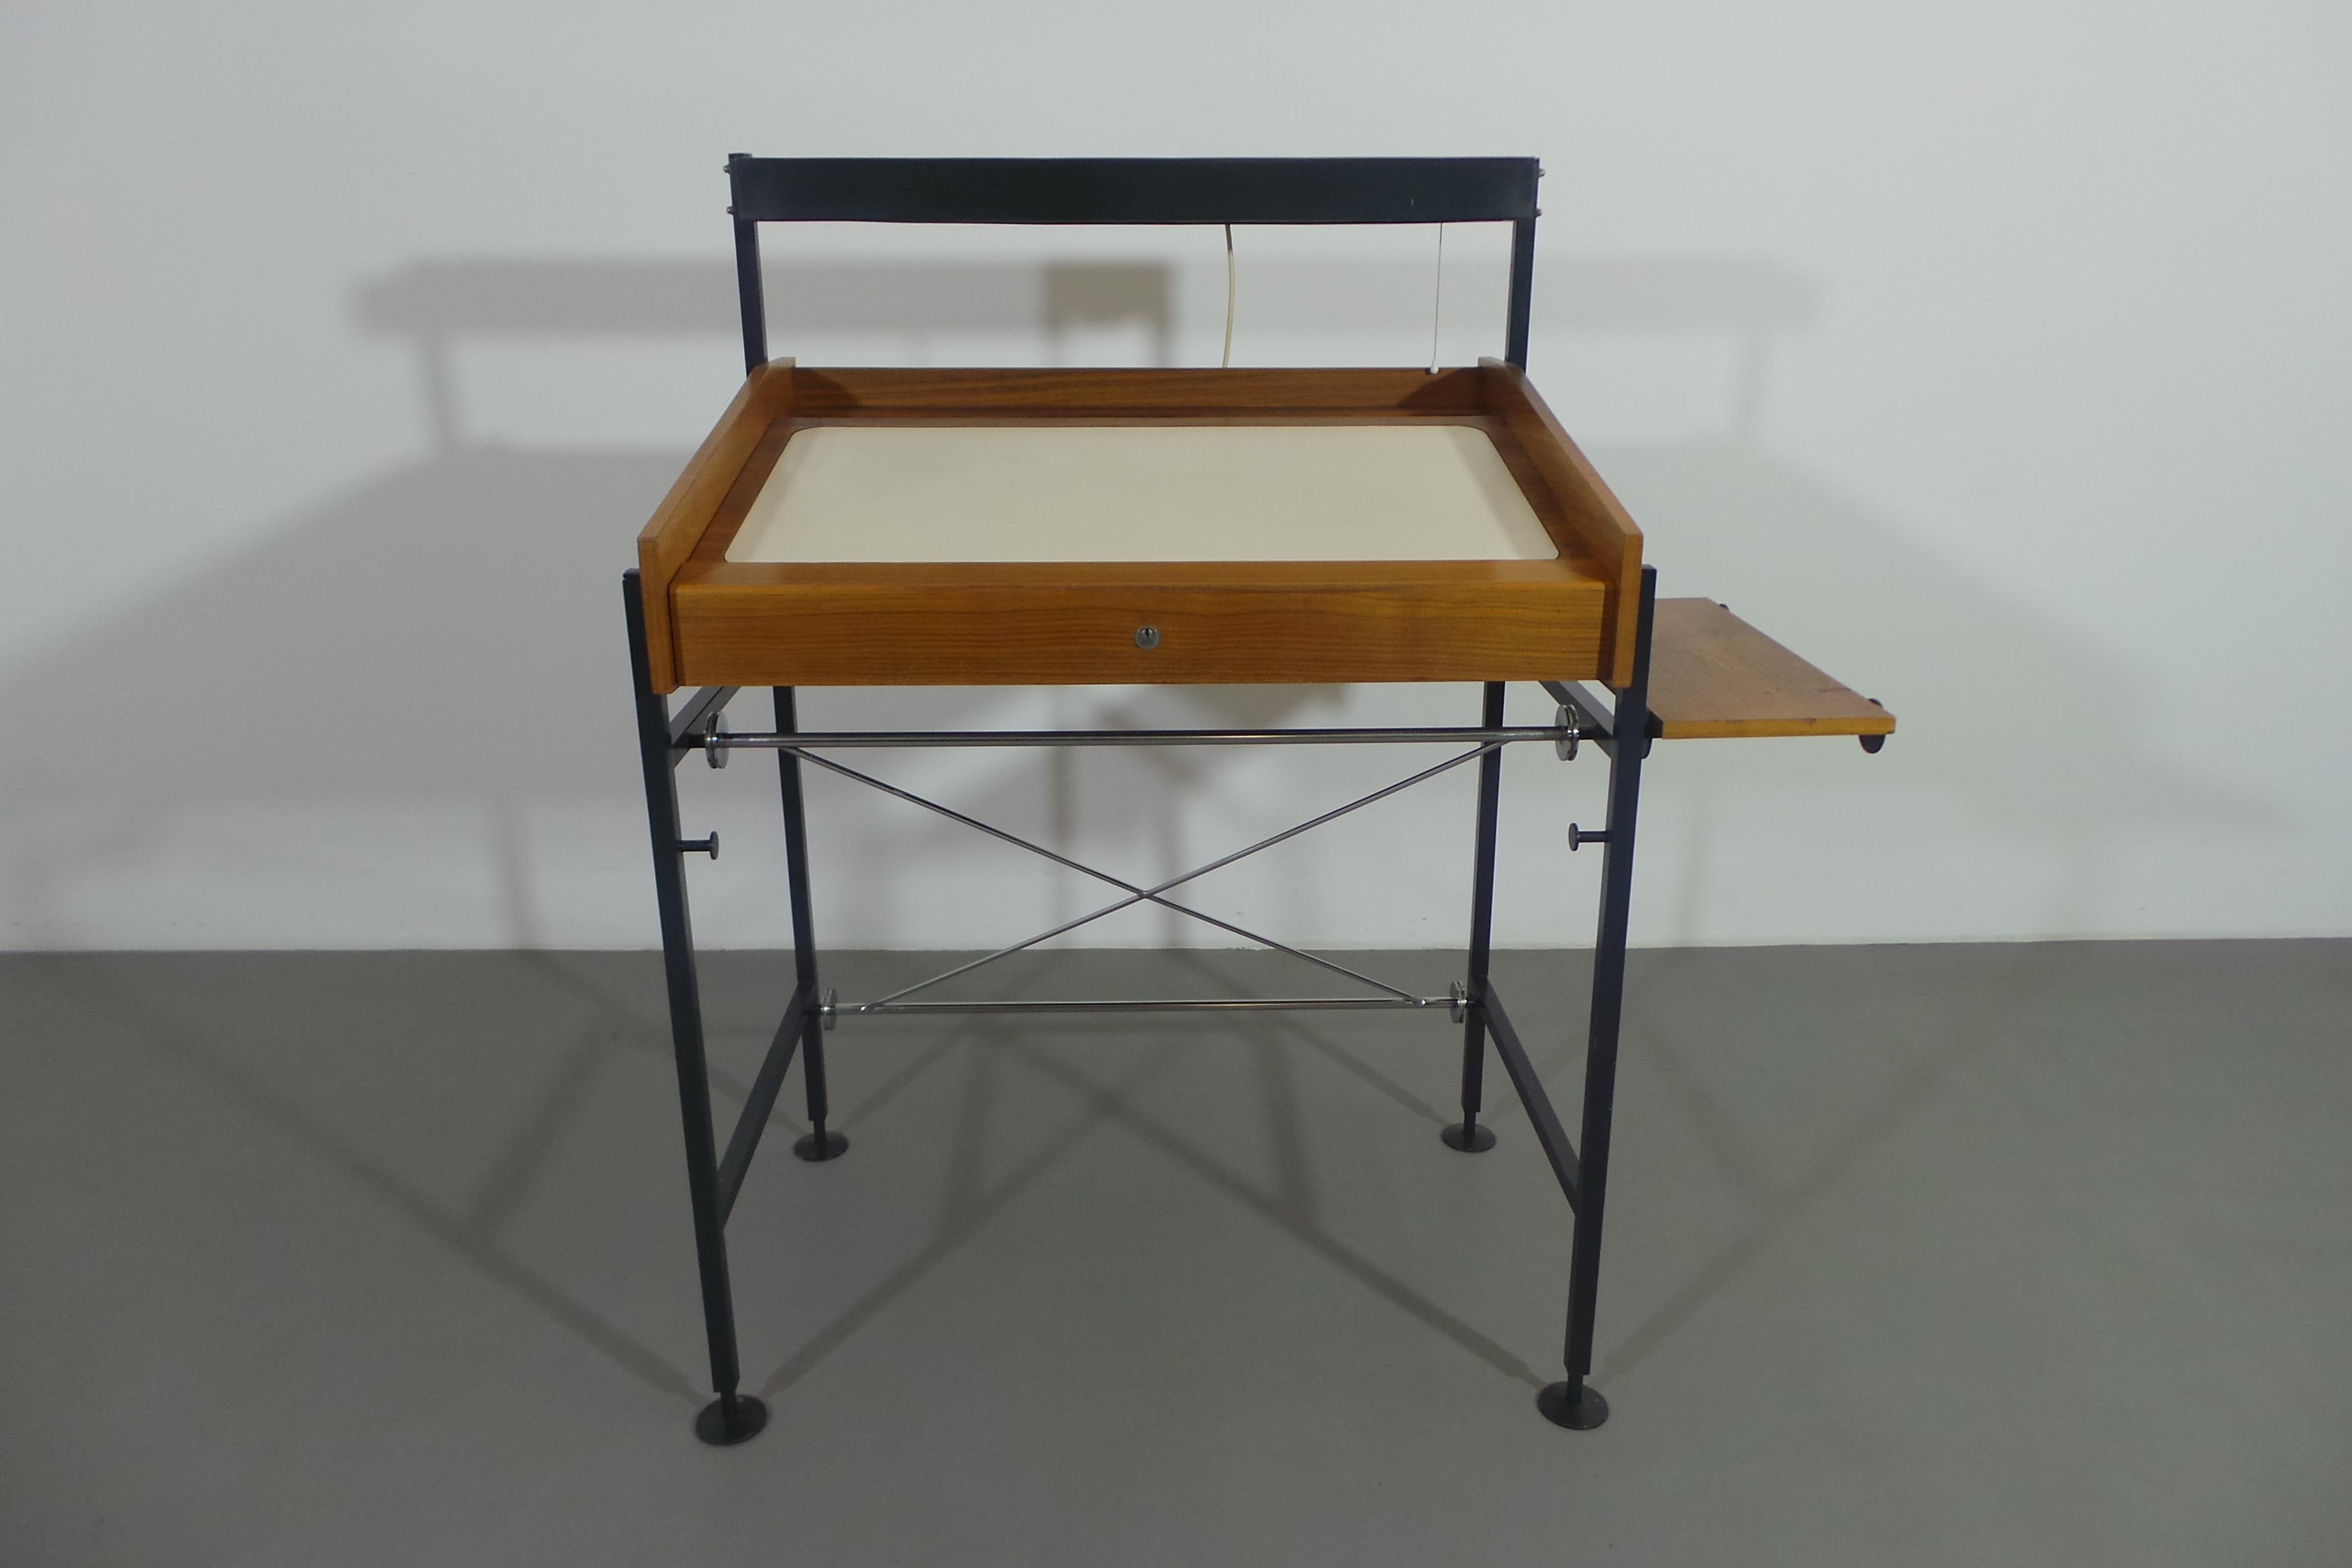 A rare piece of furniture, designed in a small number of pieces for the German government by architect 'Egon Eiermann', which, incomprehensibly, never received adequate attention and recognition, on the art and design market!

The standing desk is